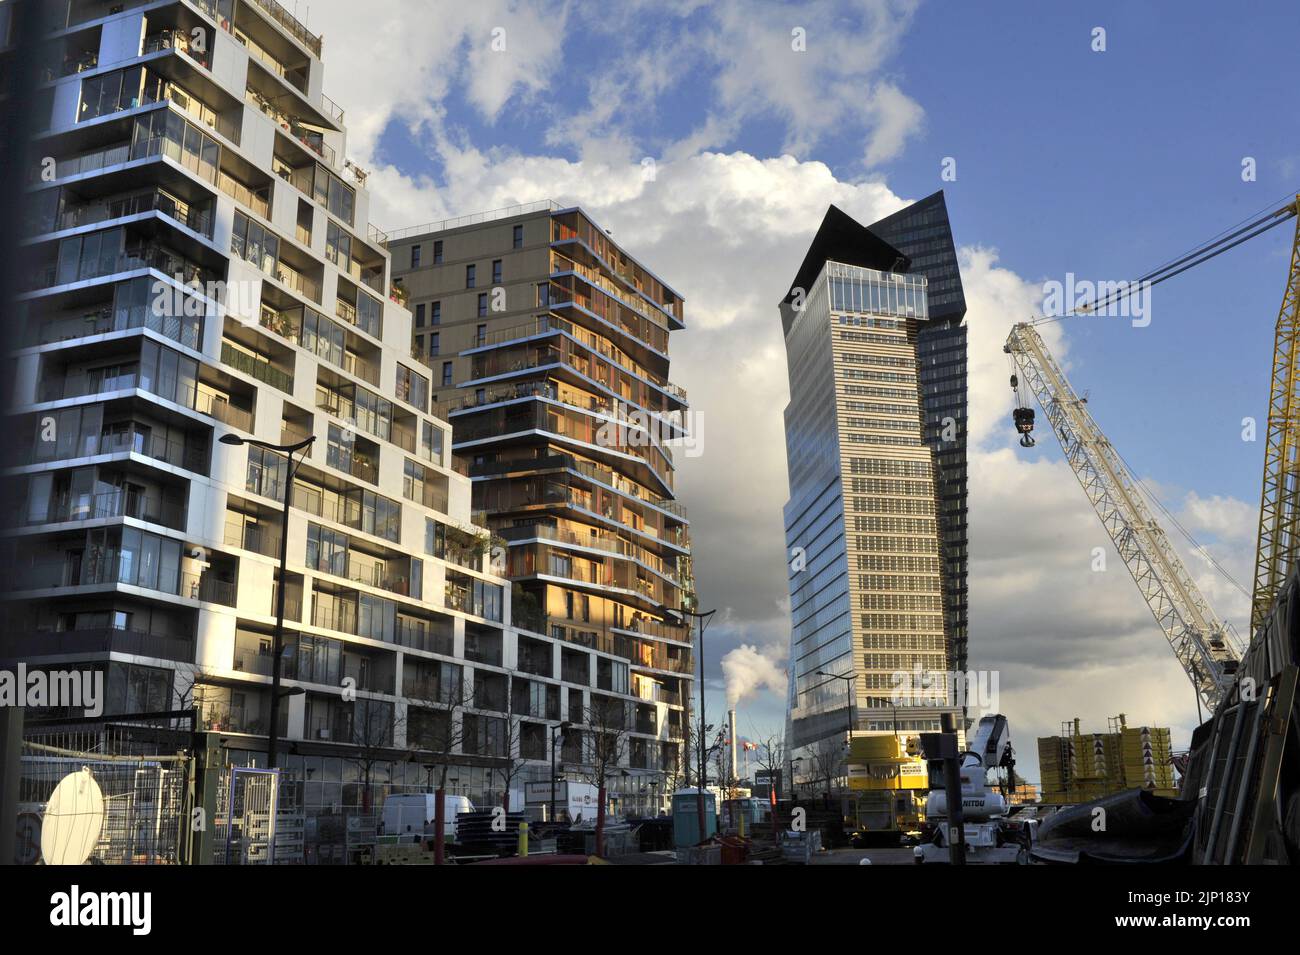 FRANCE. PARIS (75) 13TH DISTRICT. LA ZAC MASSENA-BRUNESEAU. IN THE MIDDLE, THE HOME TOWER, SOCIAL HOUSING , BUILT BY BOUYGUES GROUP. AT RIGHT, THE DUO Stock Photo